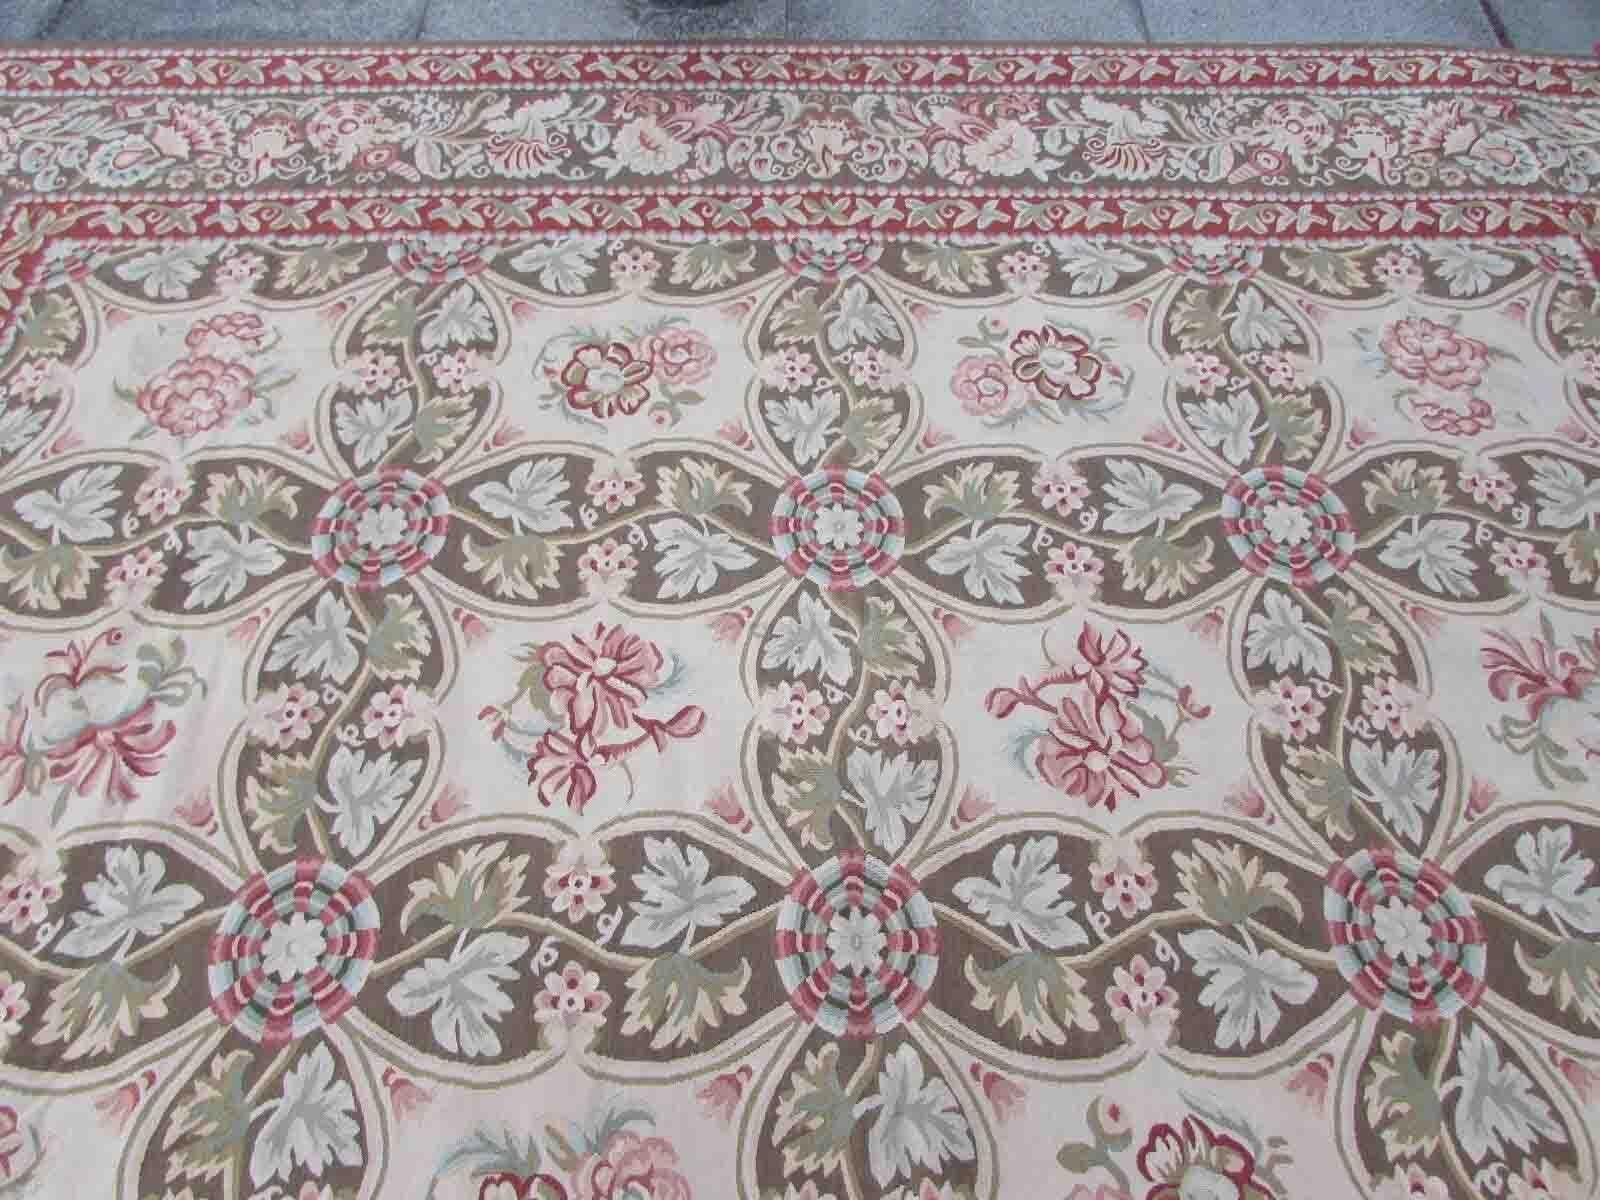 Handmade vintage French Aubusson rug in traditional design. The rug is from the end of 20th century in original good condition.

-condition: original good, 

-circa: 1970s,

-size: 10.1' x 15.5' (310cm x 473cm),

-material: wool,

-country